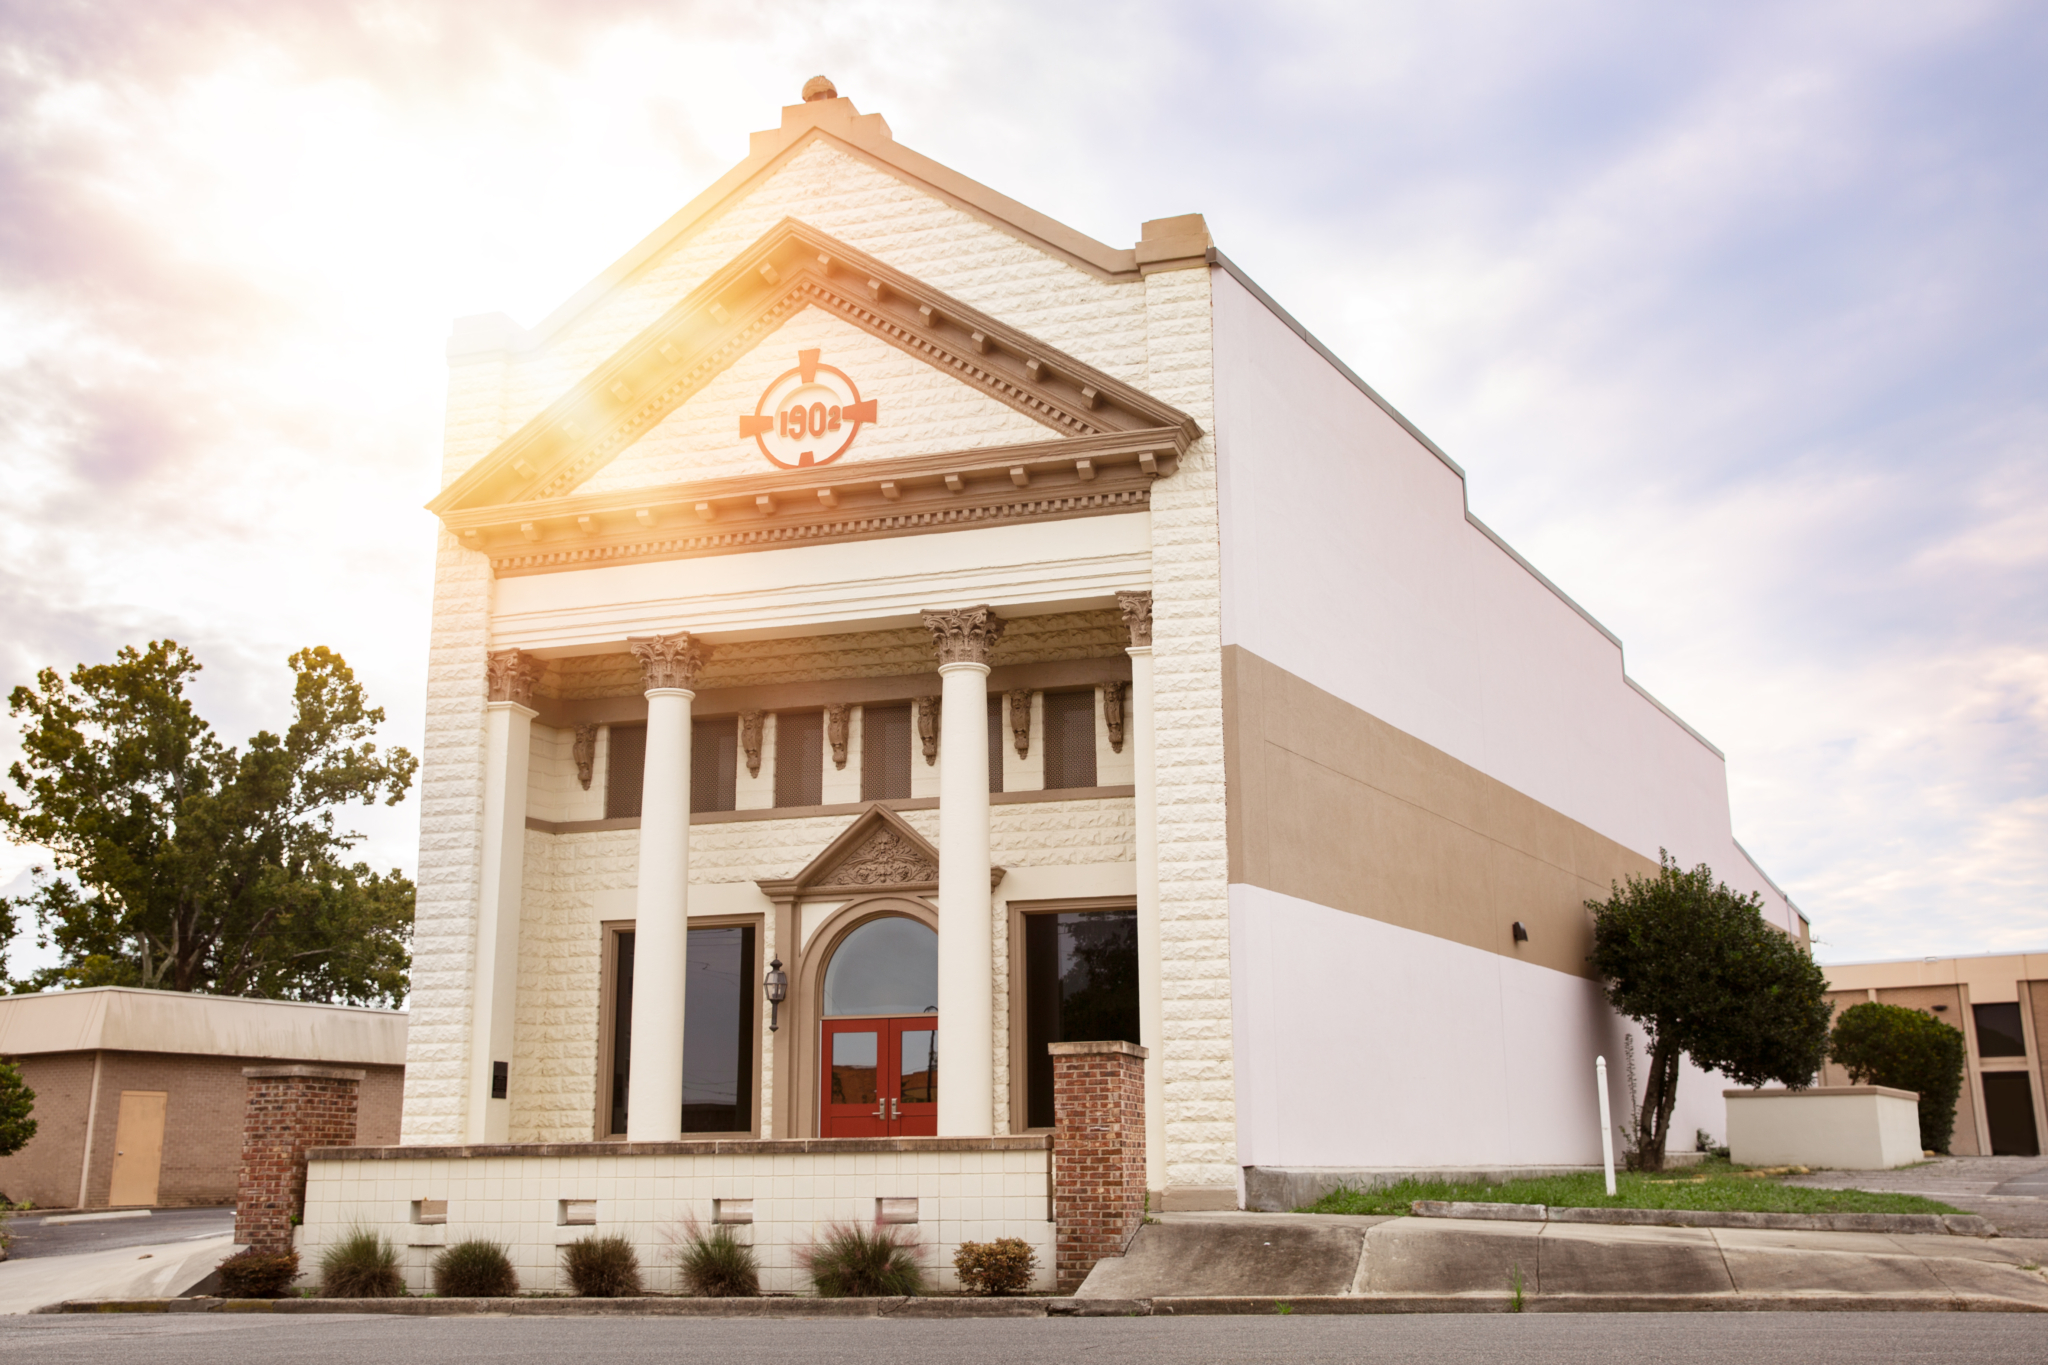 The Historic Bank Building is located in downtown Marianna and is available to rent for those planning an event.